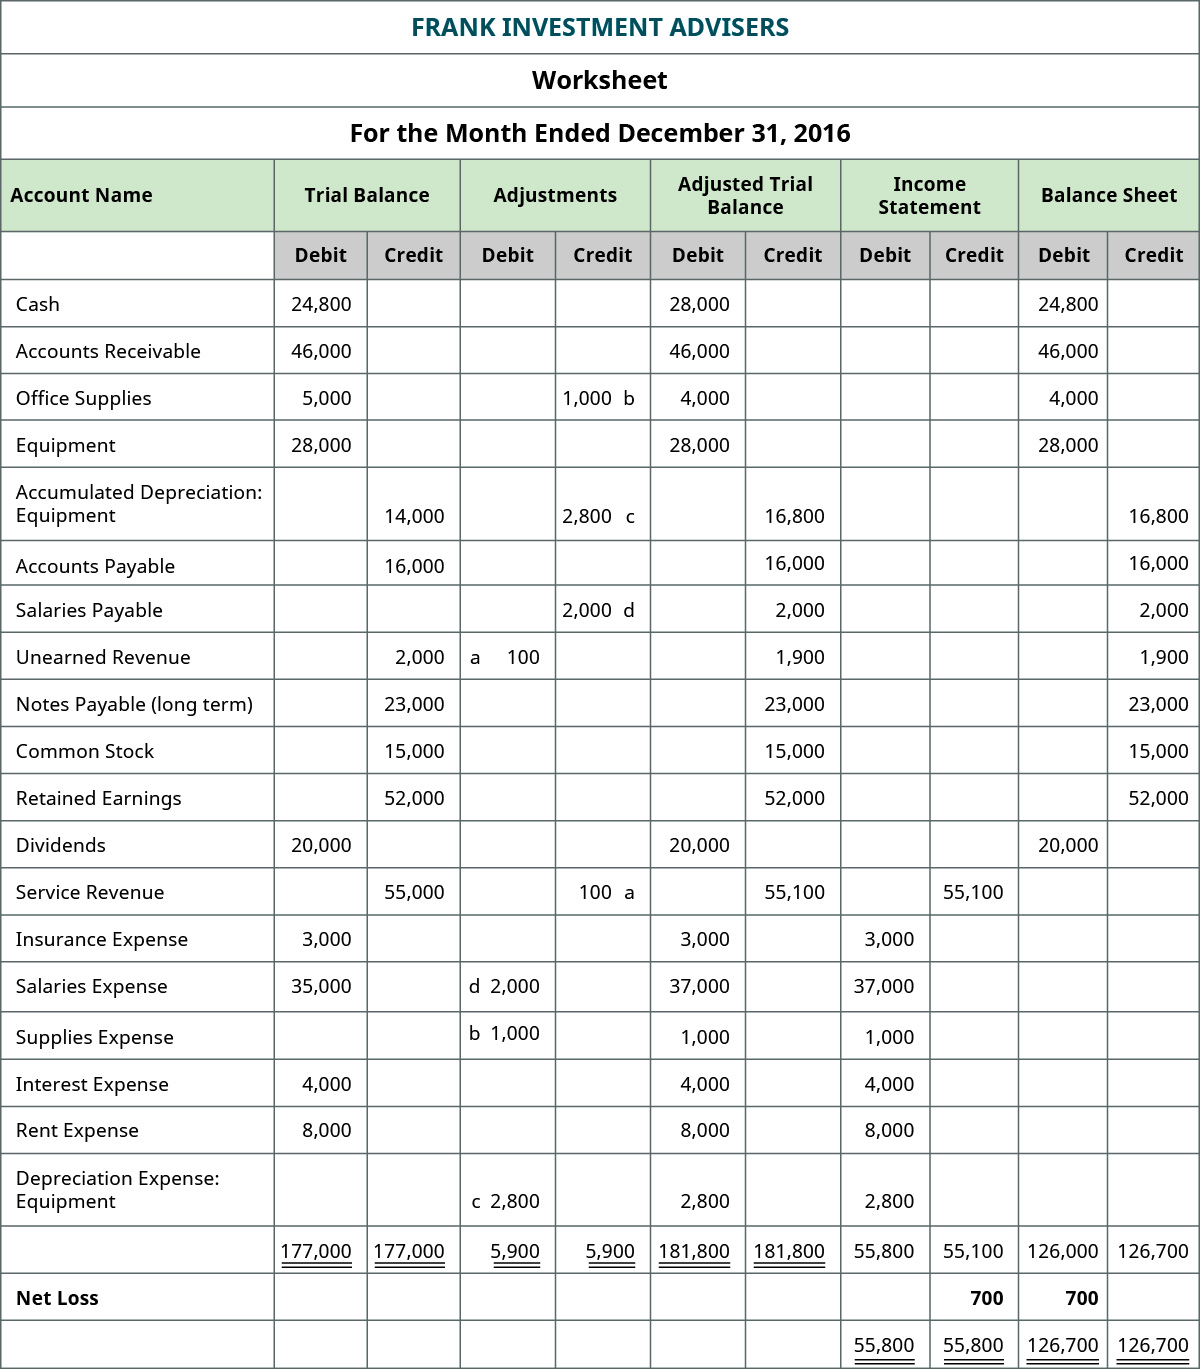 Frank Investment Advisers, Worksheet, December 31, 2016. Income Statement columns. Debit column: Insurance expense 3,000; Salaries expense 37,000, Supplies expense 1,000; Interest expense 4,000; Rent expense 8,000; Depreciation expense: equipment 2,800; total debit column 55,800. Credit column: Service revenue 55,100; subtotal credit column 55,100; Net Loss 700; Total 55,800. Balance Sheet columns. Debit column: Cash 28,000; Accounts receivable 46,000; Office supplies 4,000; Equipment 28,000; Dividends 20,000; subtotal debit column 126,000; net loss 700; total debit column $126,700. Credit column: Accumulated depreciation: equipment 16,800; Accounts payable 16,000; Salaries payable 2,000; Unearned revenue 1,900; Notes Payable (long term) 23,000; Common stock 15,000; Retained earnings 52,000; total credit column 126,700.